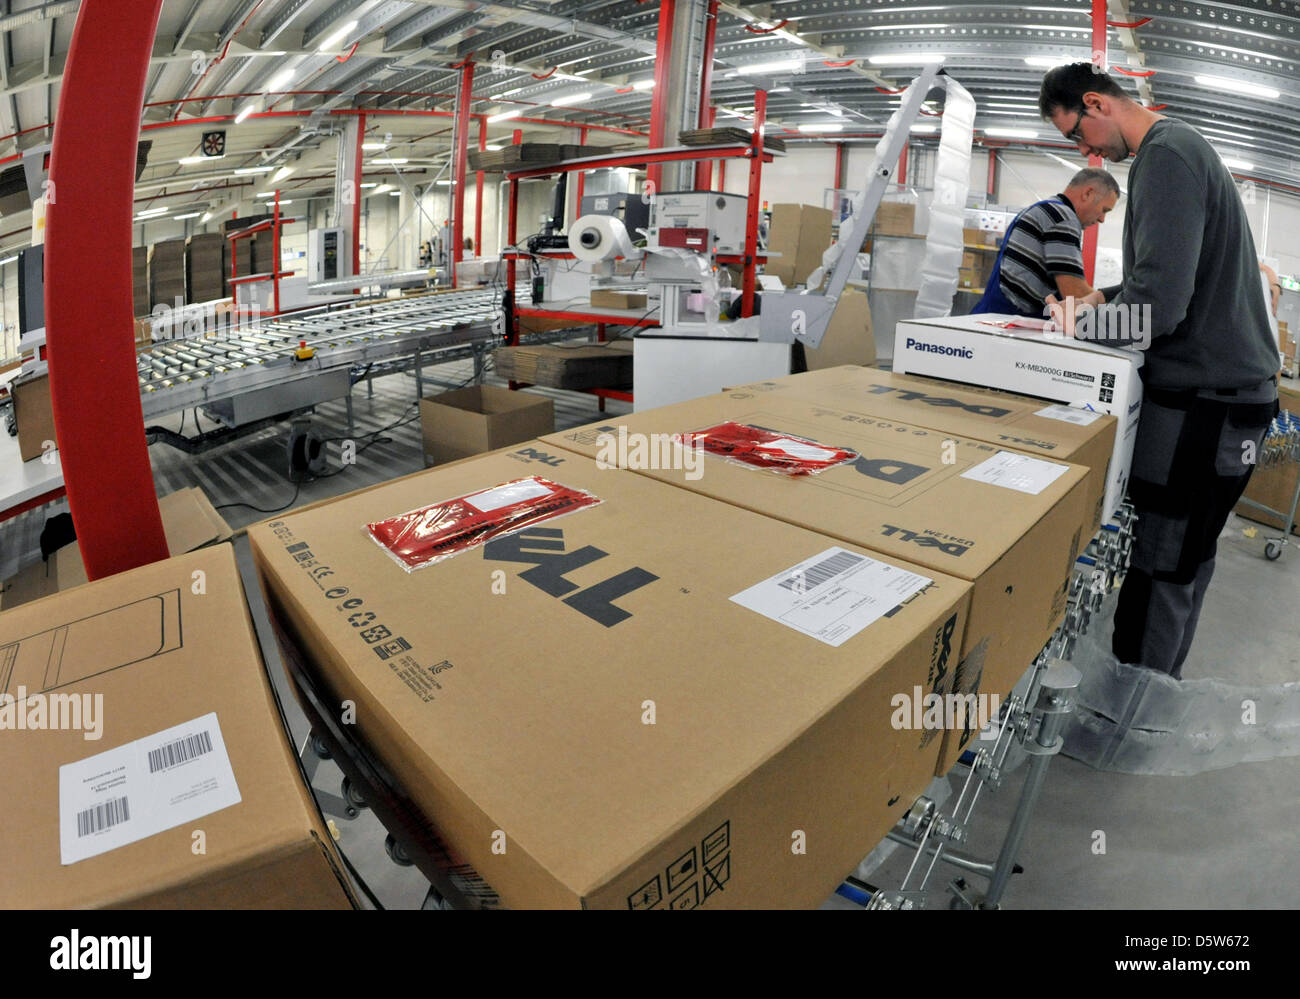 Employees prepare parcels for delivery at the new logistics centre for consumer electronics of the online retailer redcoon in Erfurt, Germany, 04 October 2012. The centre opened at the start of September and will provide 200 jobs. Photo: Martin Schutt Stock Photo